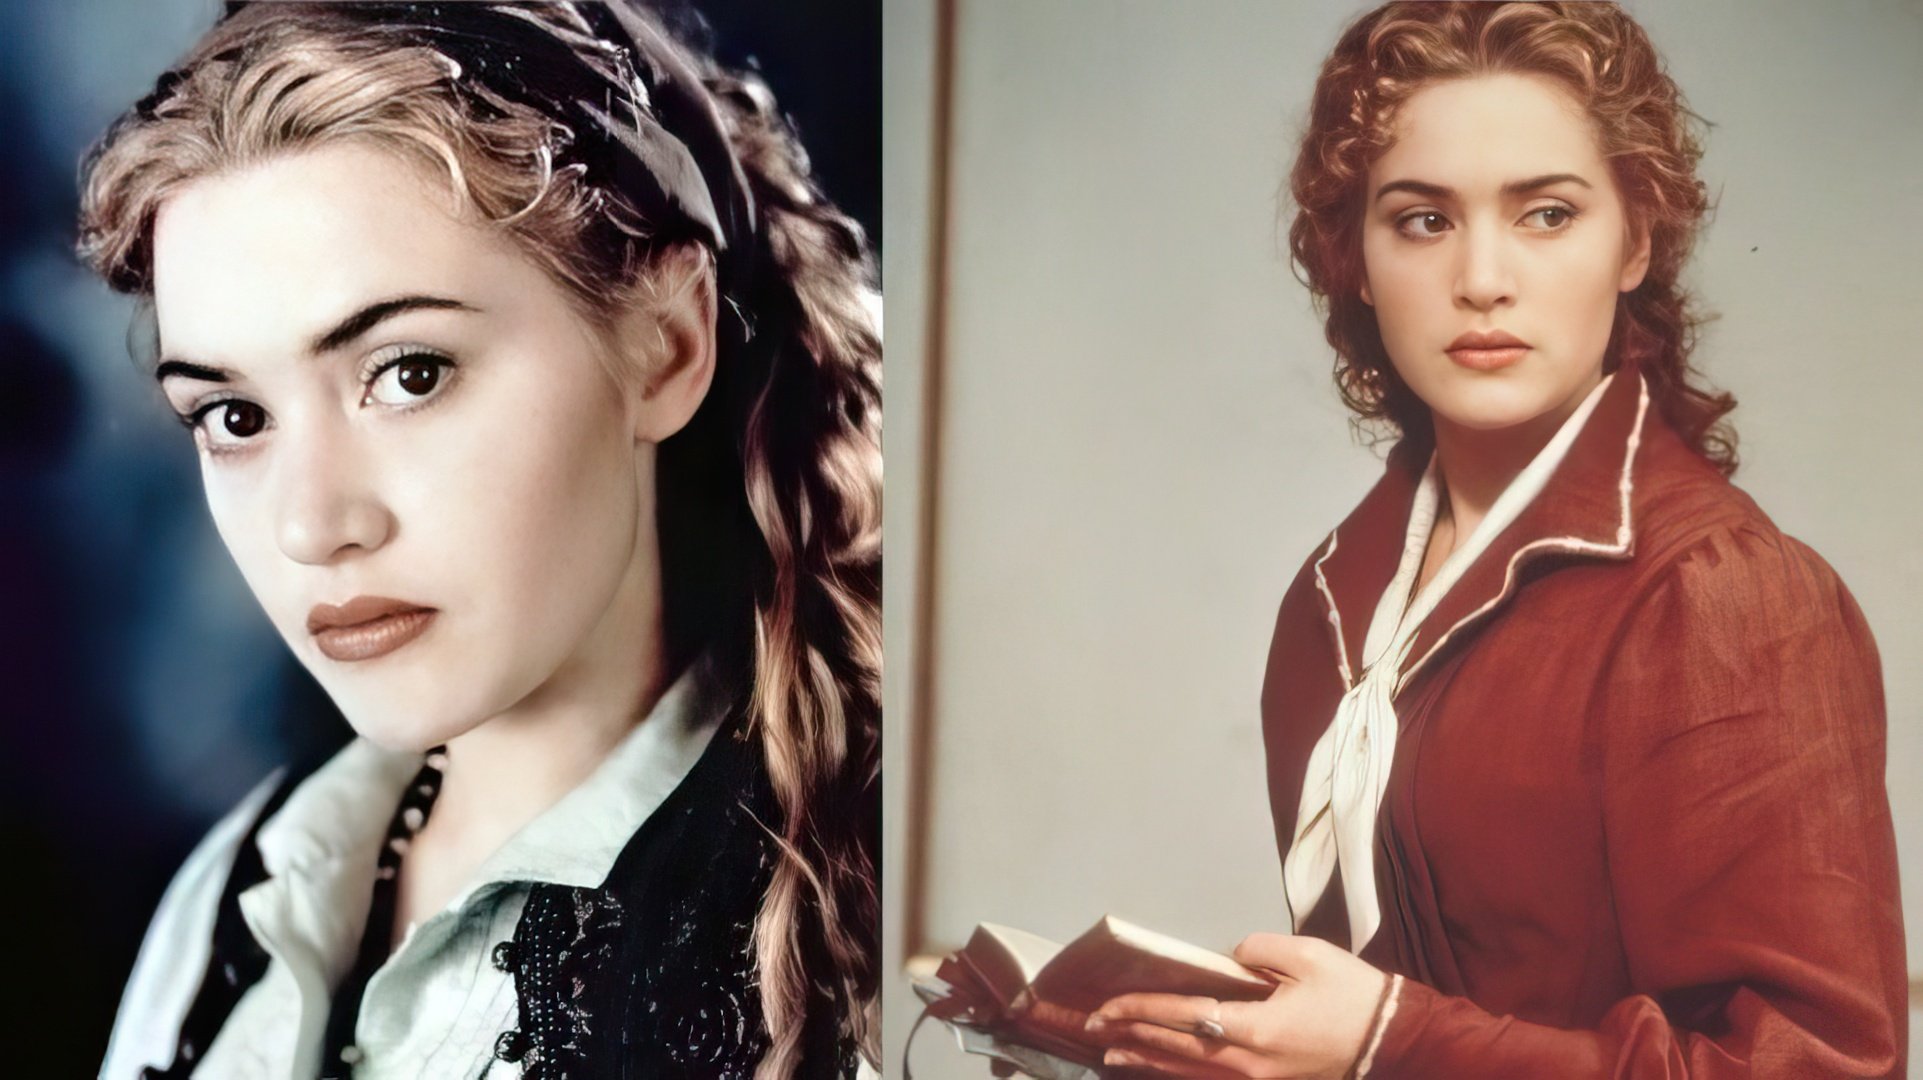 Young Kate Winslet as Ophelia